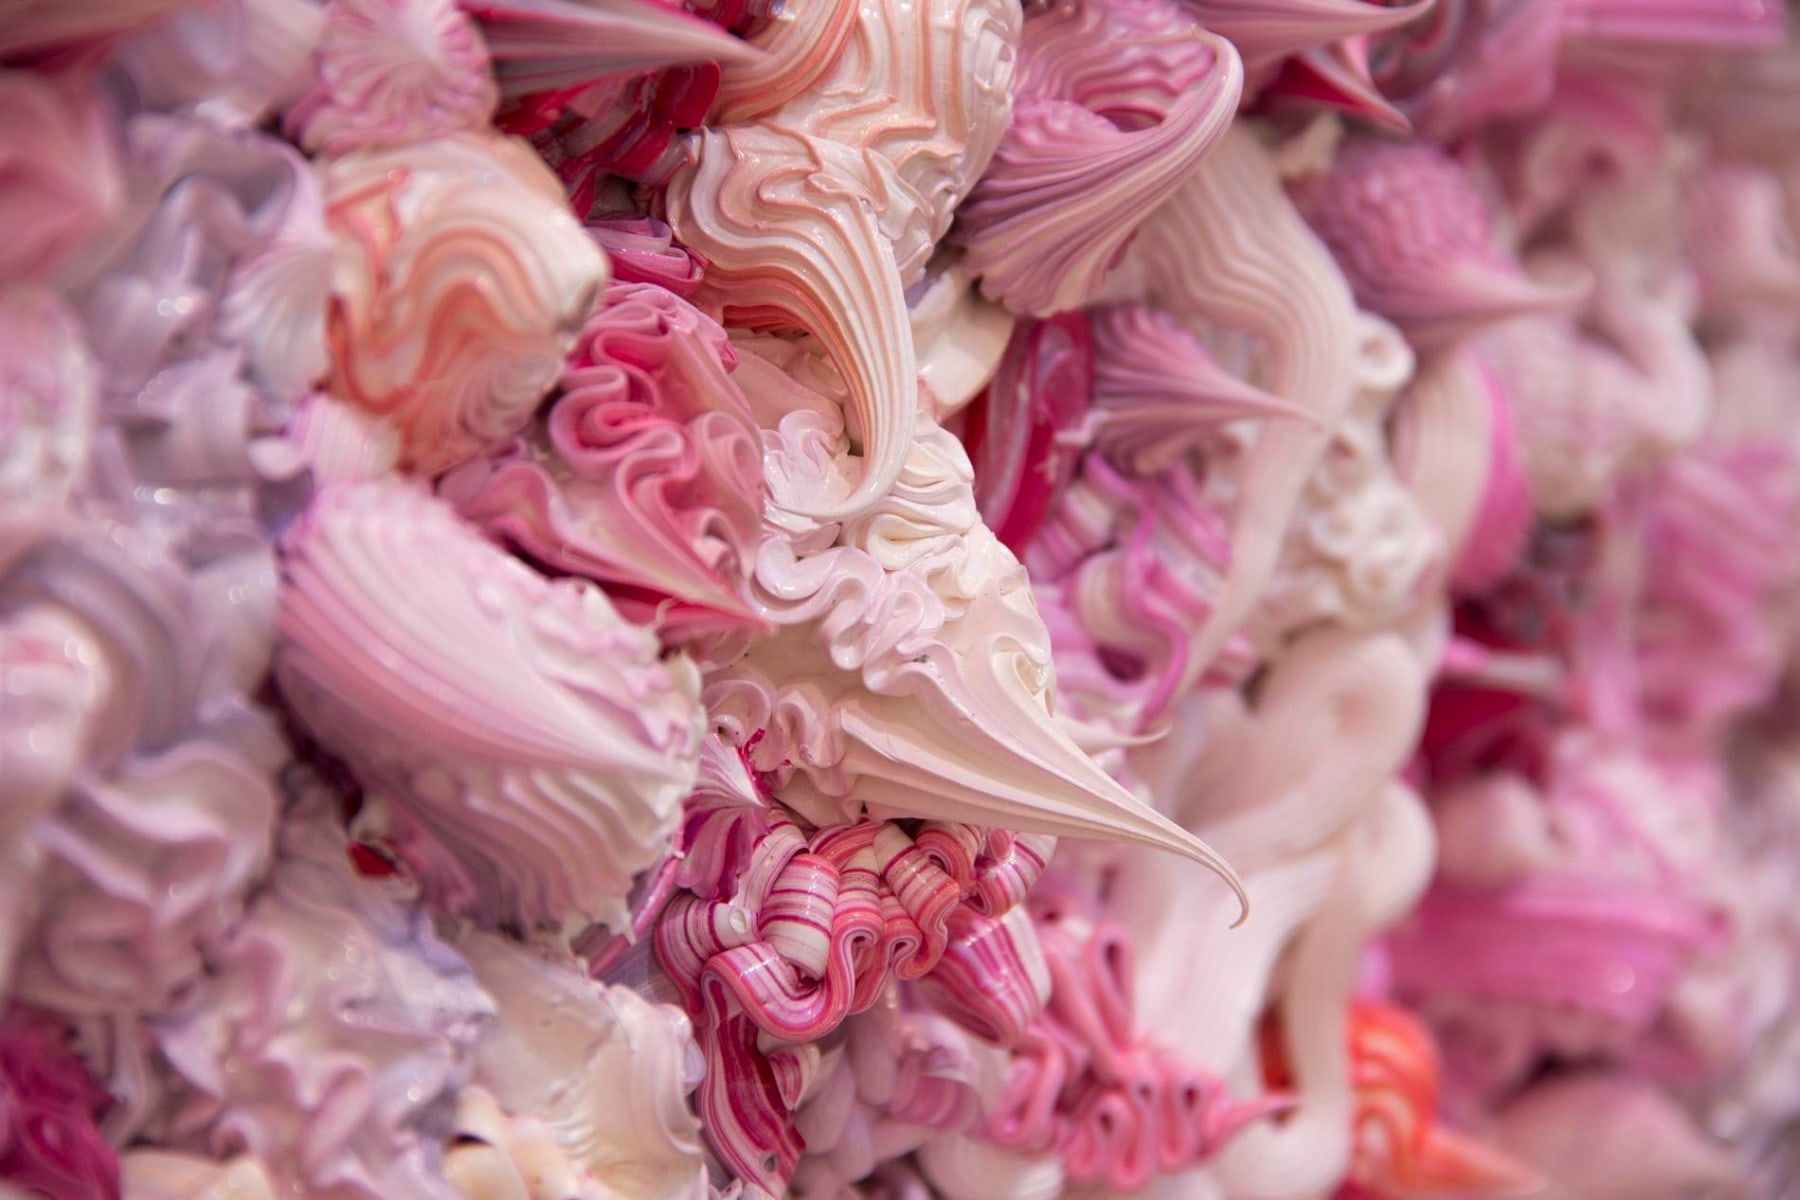 close up of whipped cream like substances in pink and purple hues